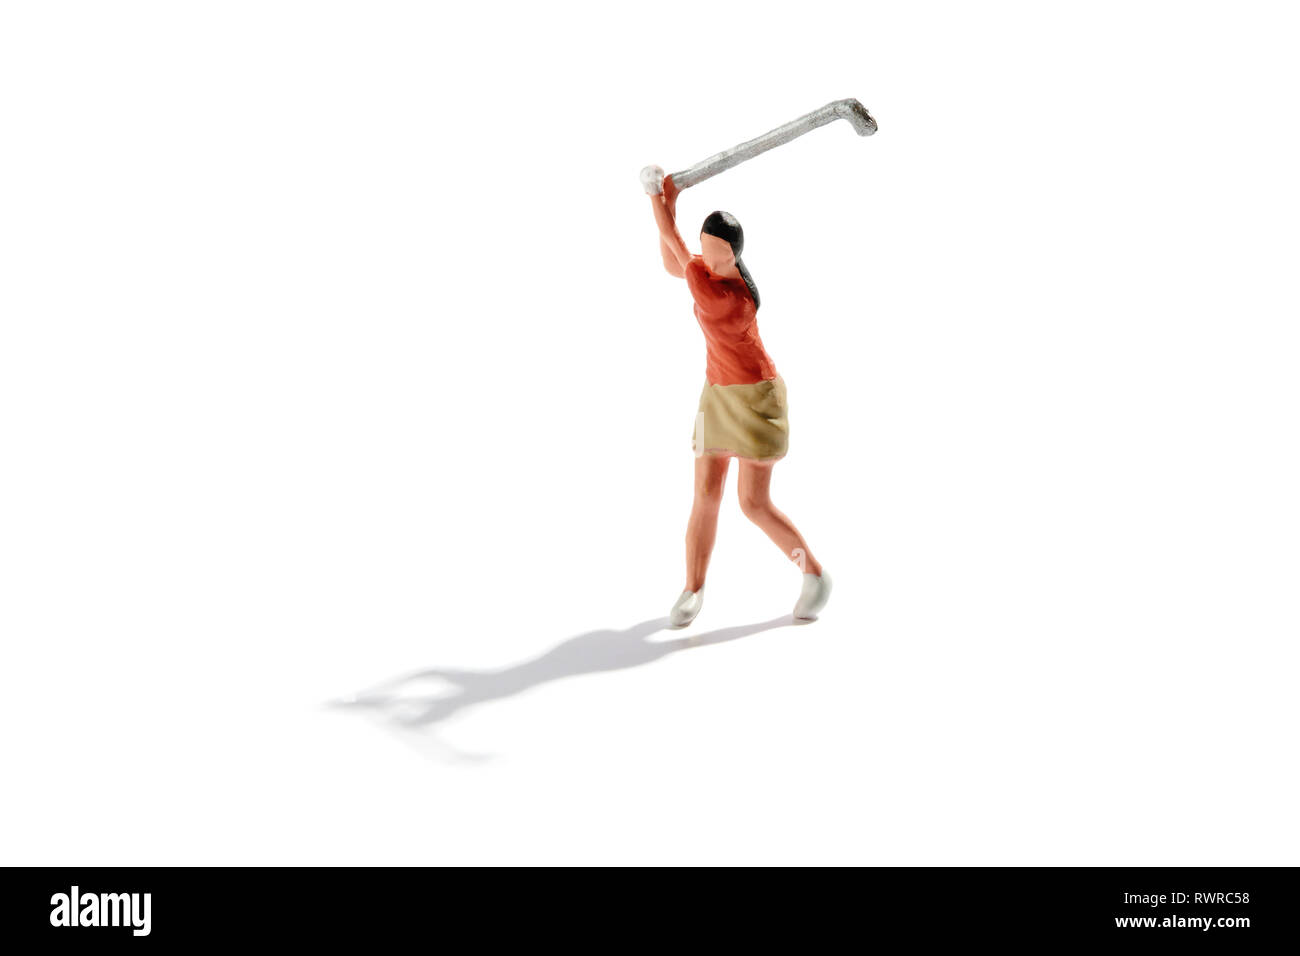 Miniature young girl playing golf swinging back her club to play the stroke isolated on white with backlit shadow and copy space Stock Photo